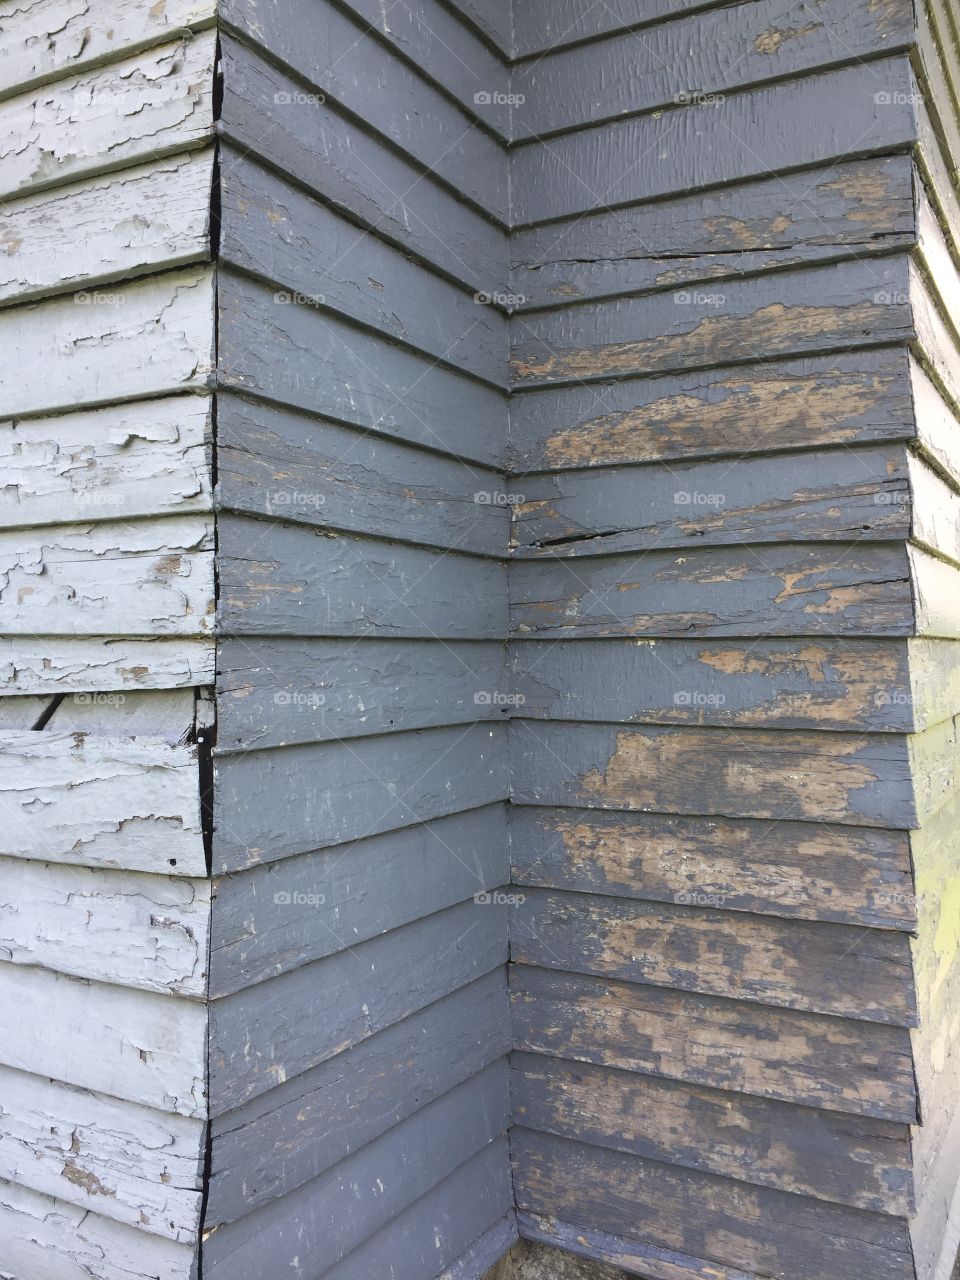 Old wood siding with worn paint